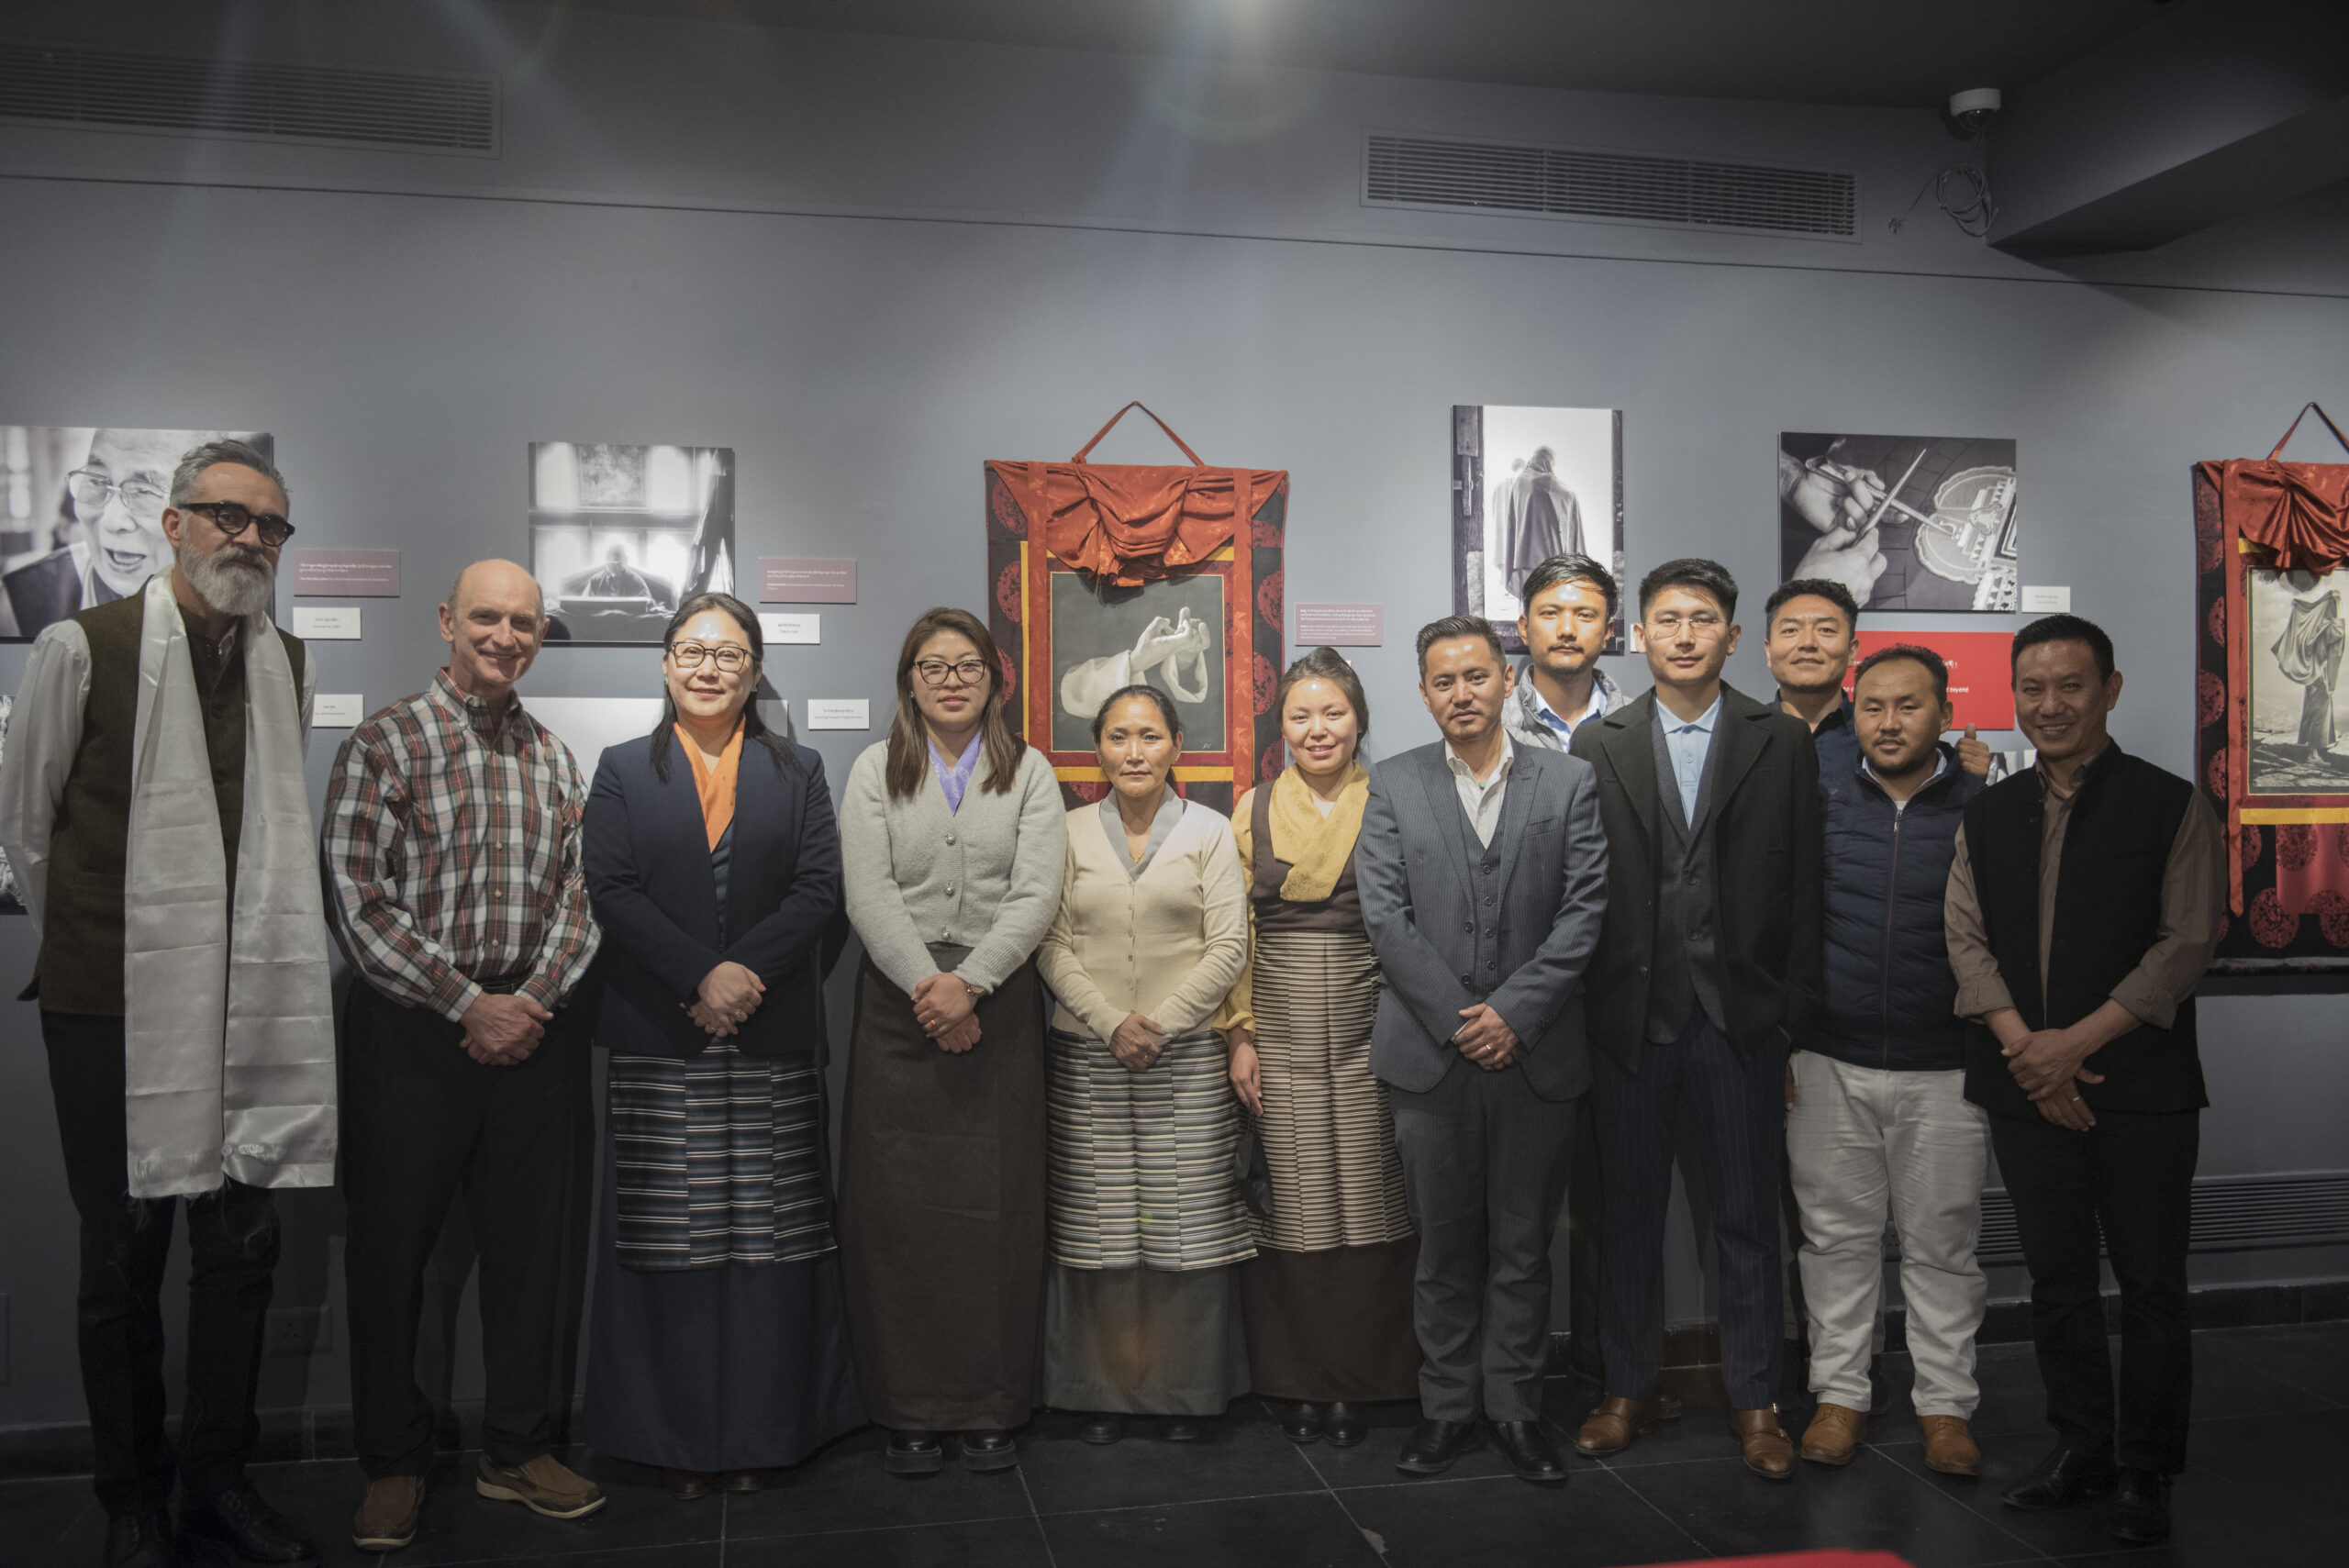 The guests with the Tibet Museum staff.